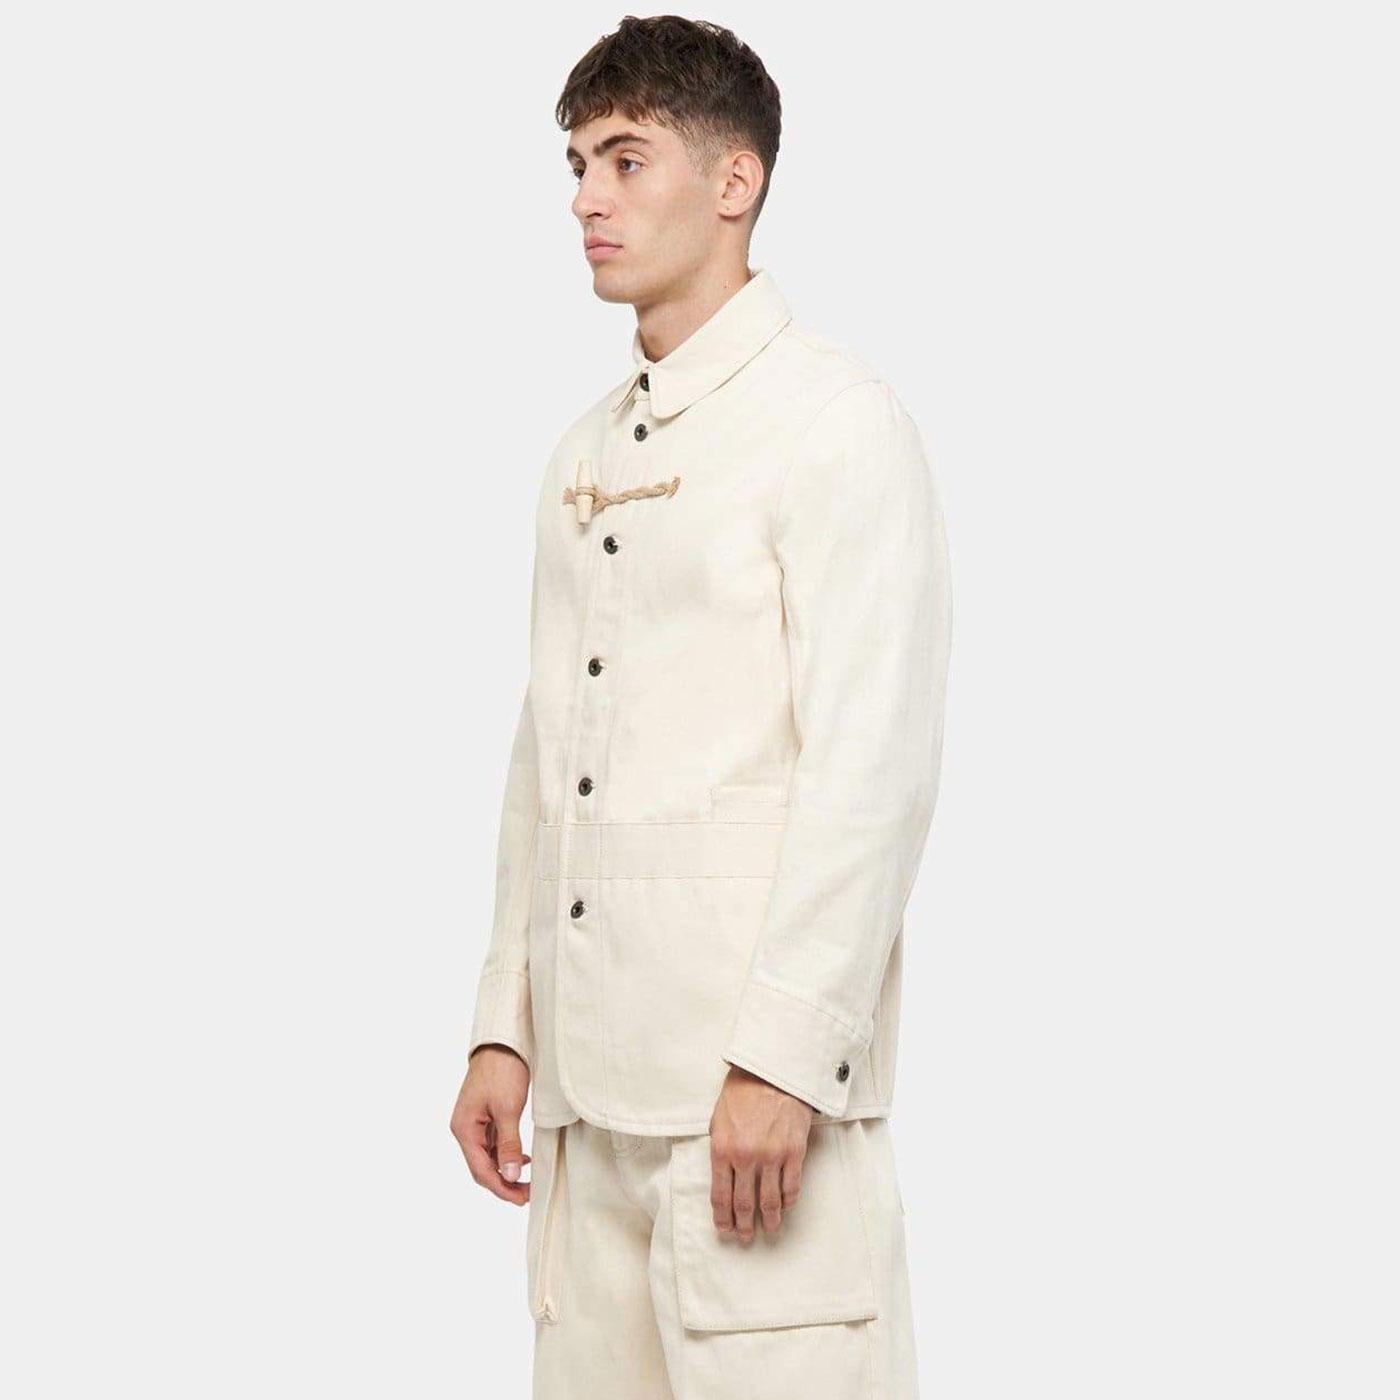 GLOVERALL X ULLAC Cotton Twill Painter Jacket in Ecru